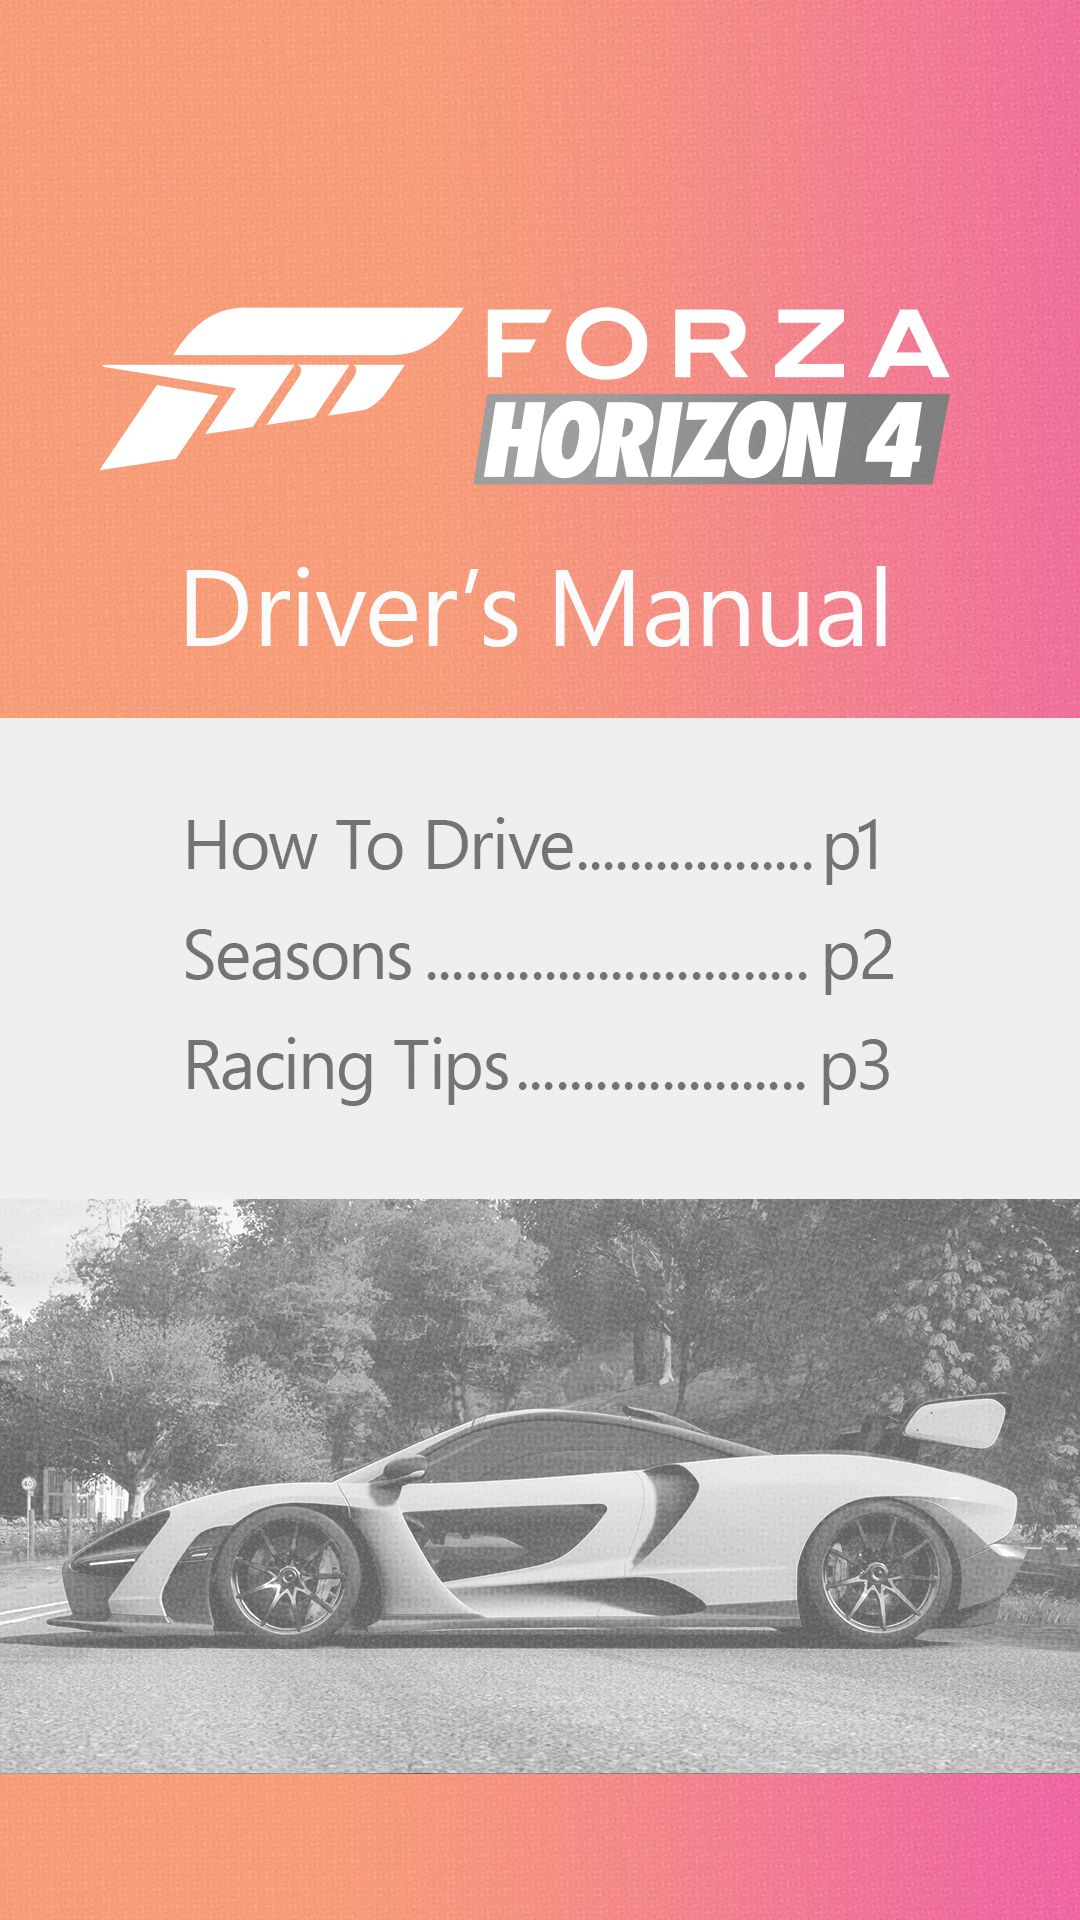 [IGS]-Forza-Driver_s-Manual_10.3_frame1.png